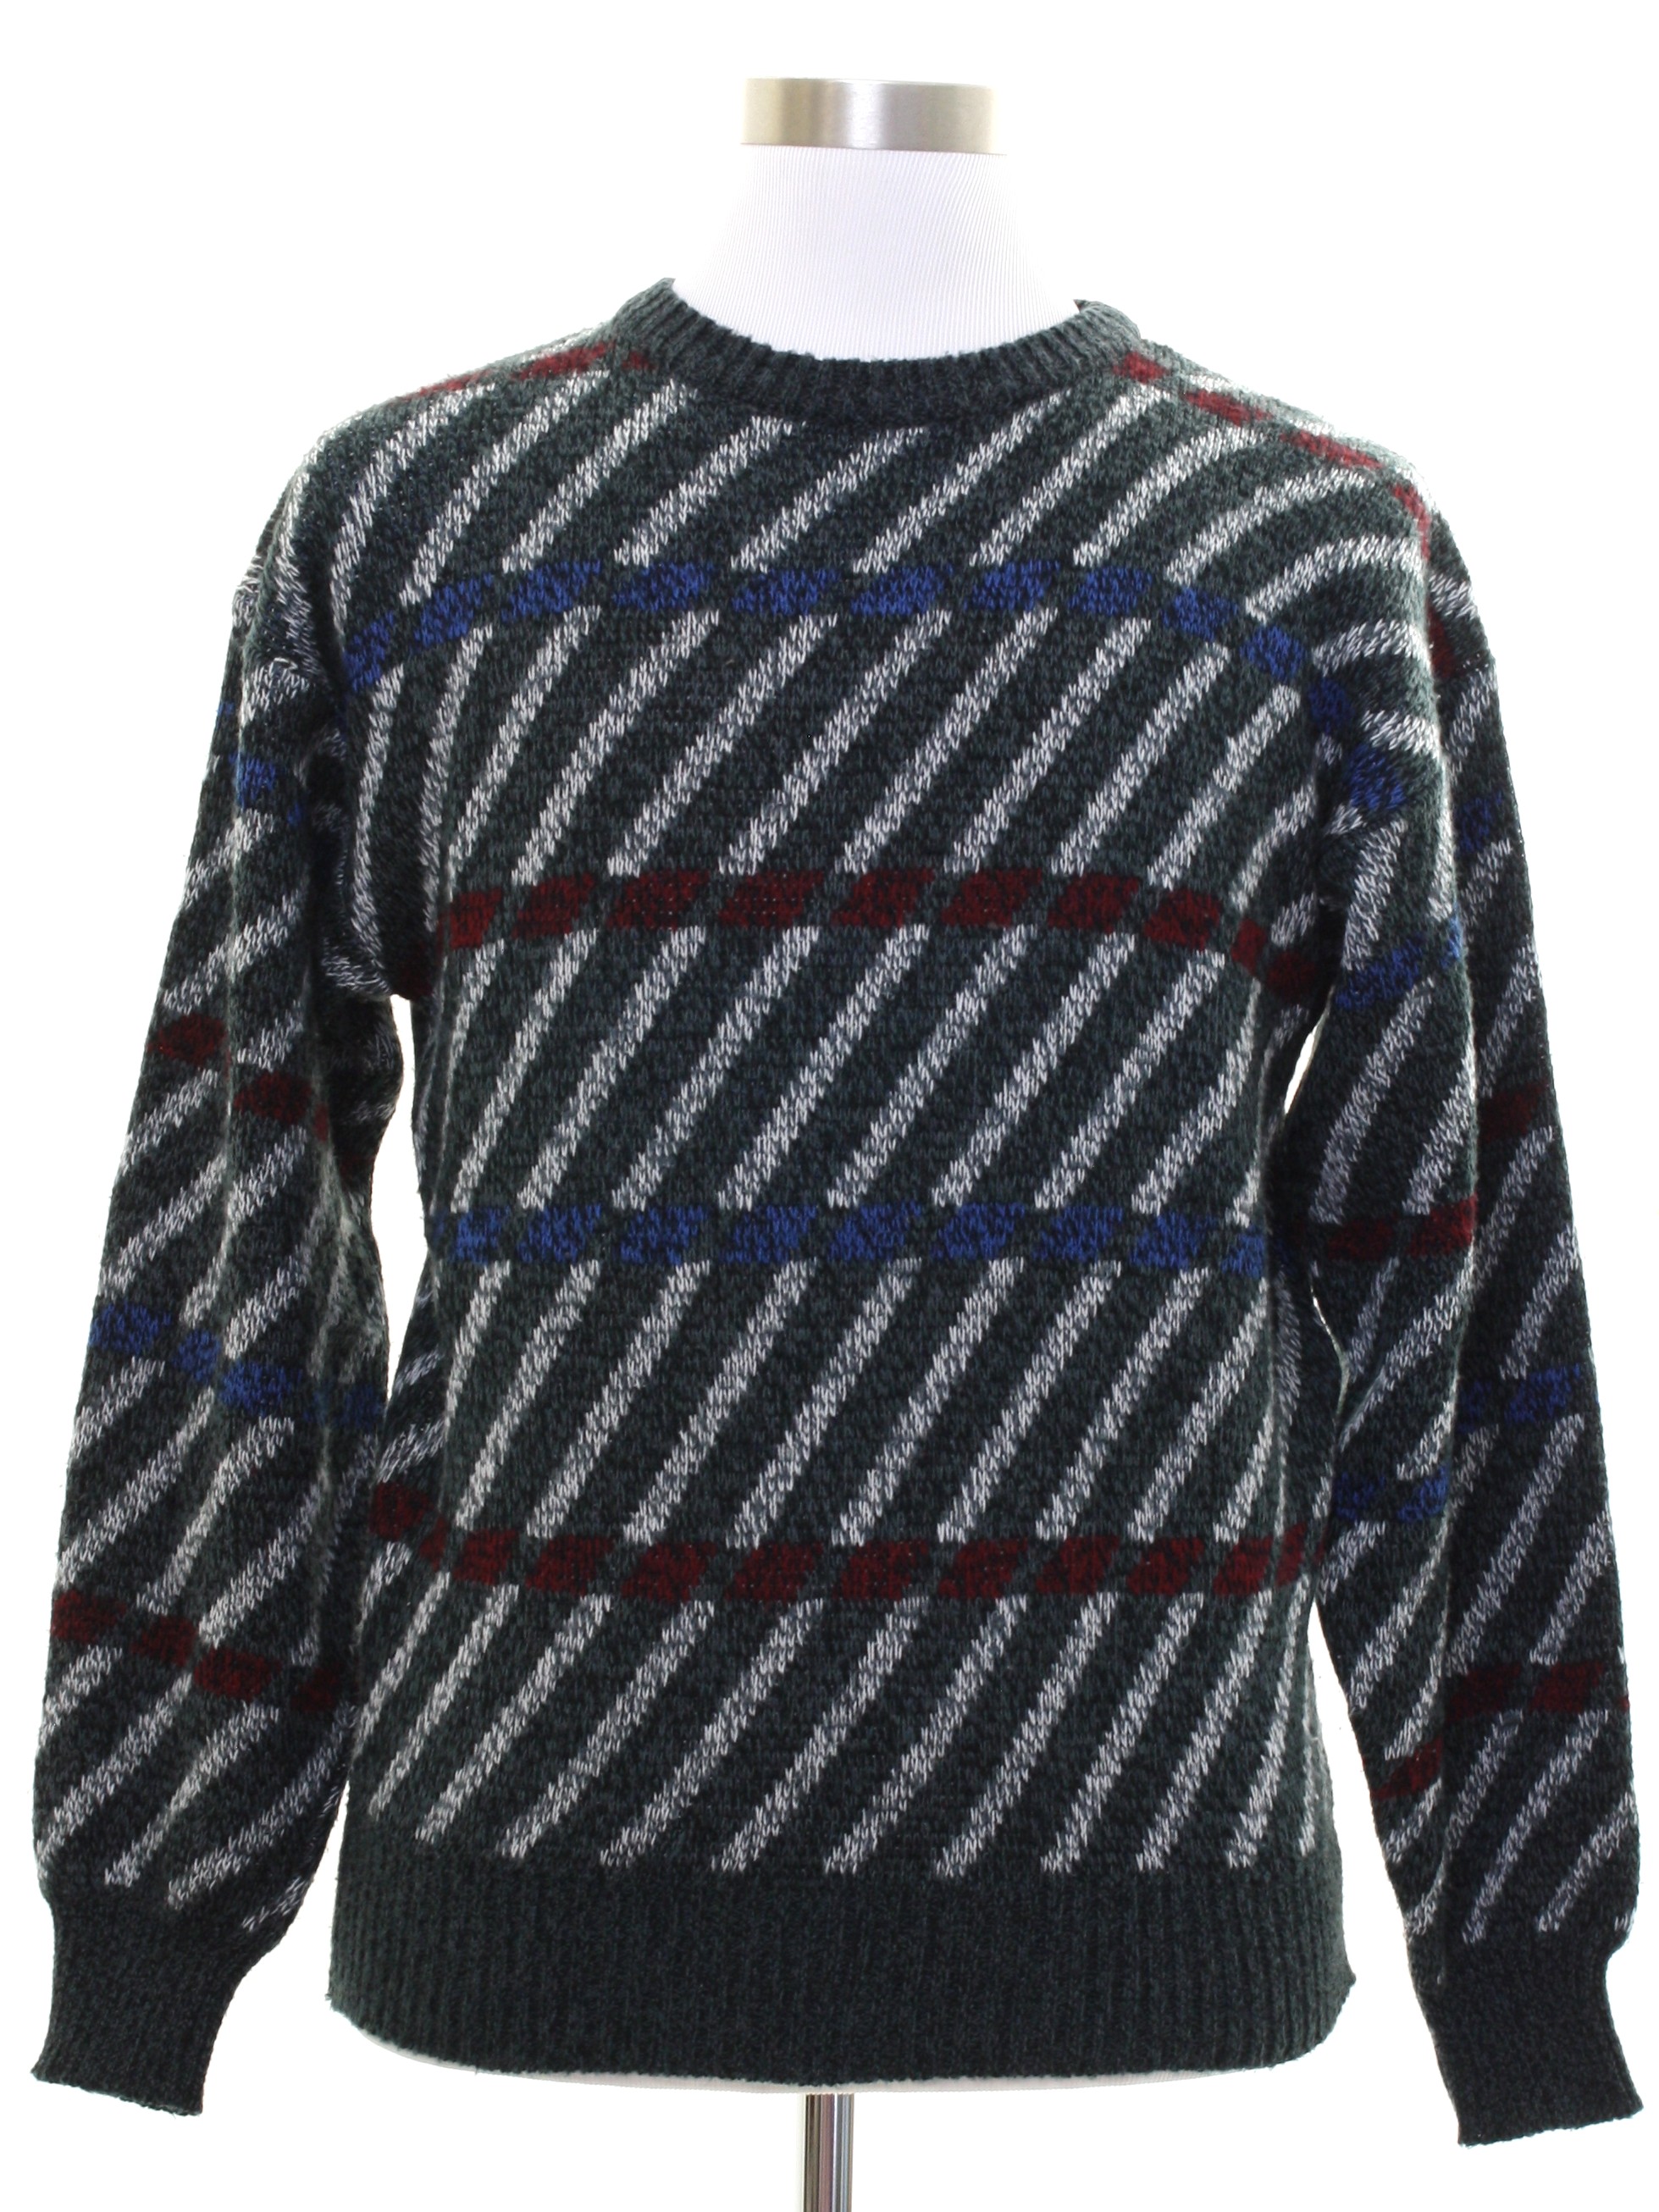 Vintage 80s Sweater: 80s -Michael Gerald- Mens gray background acrylic ...